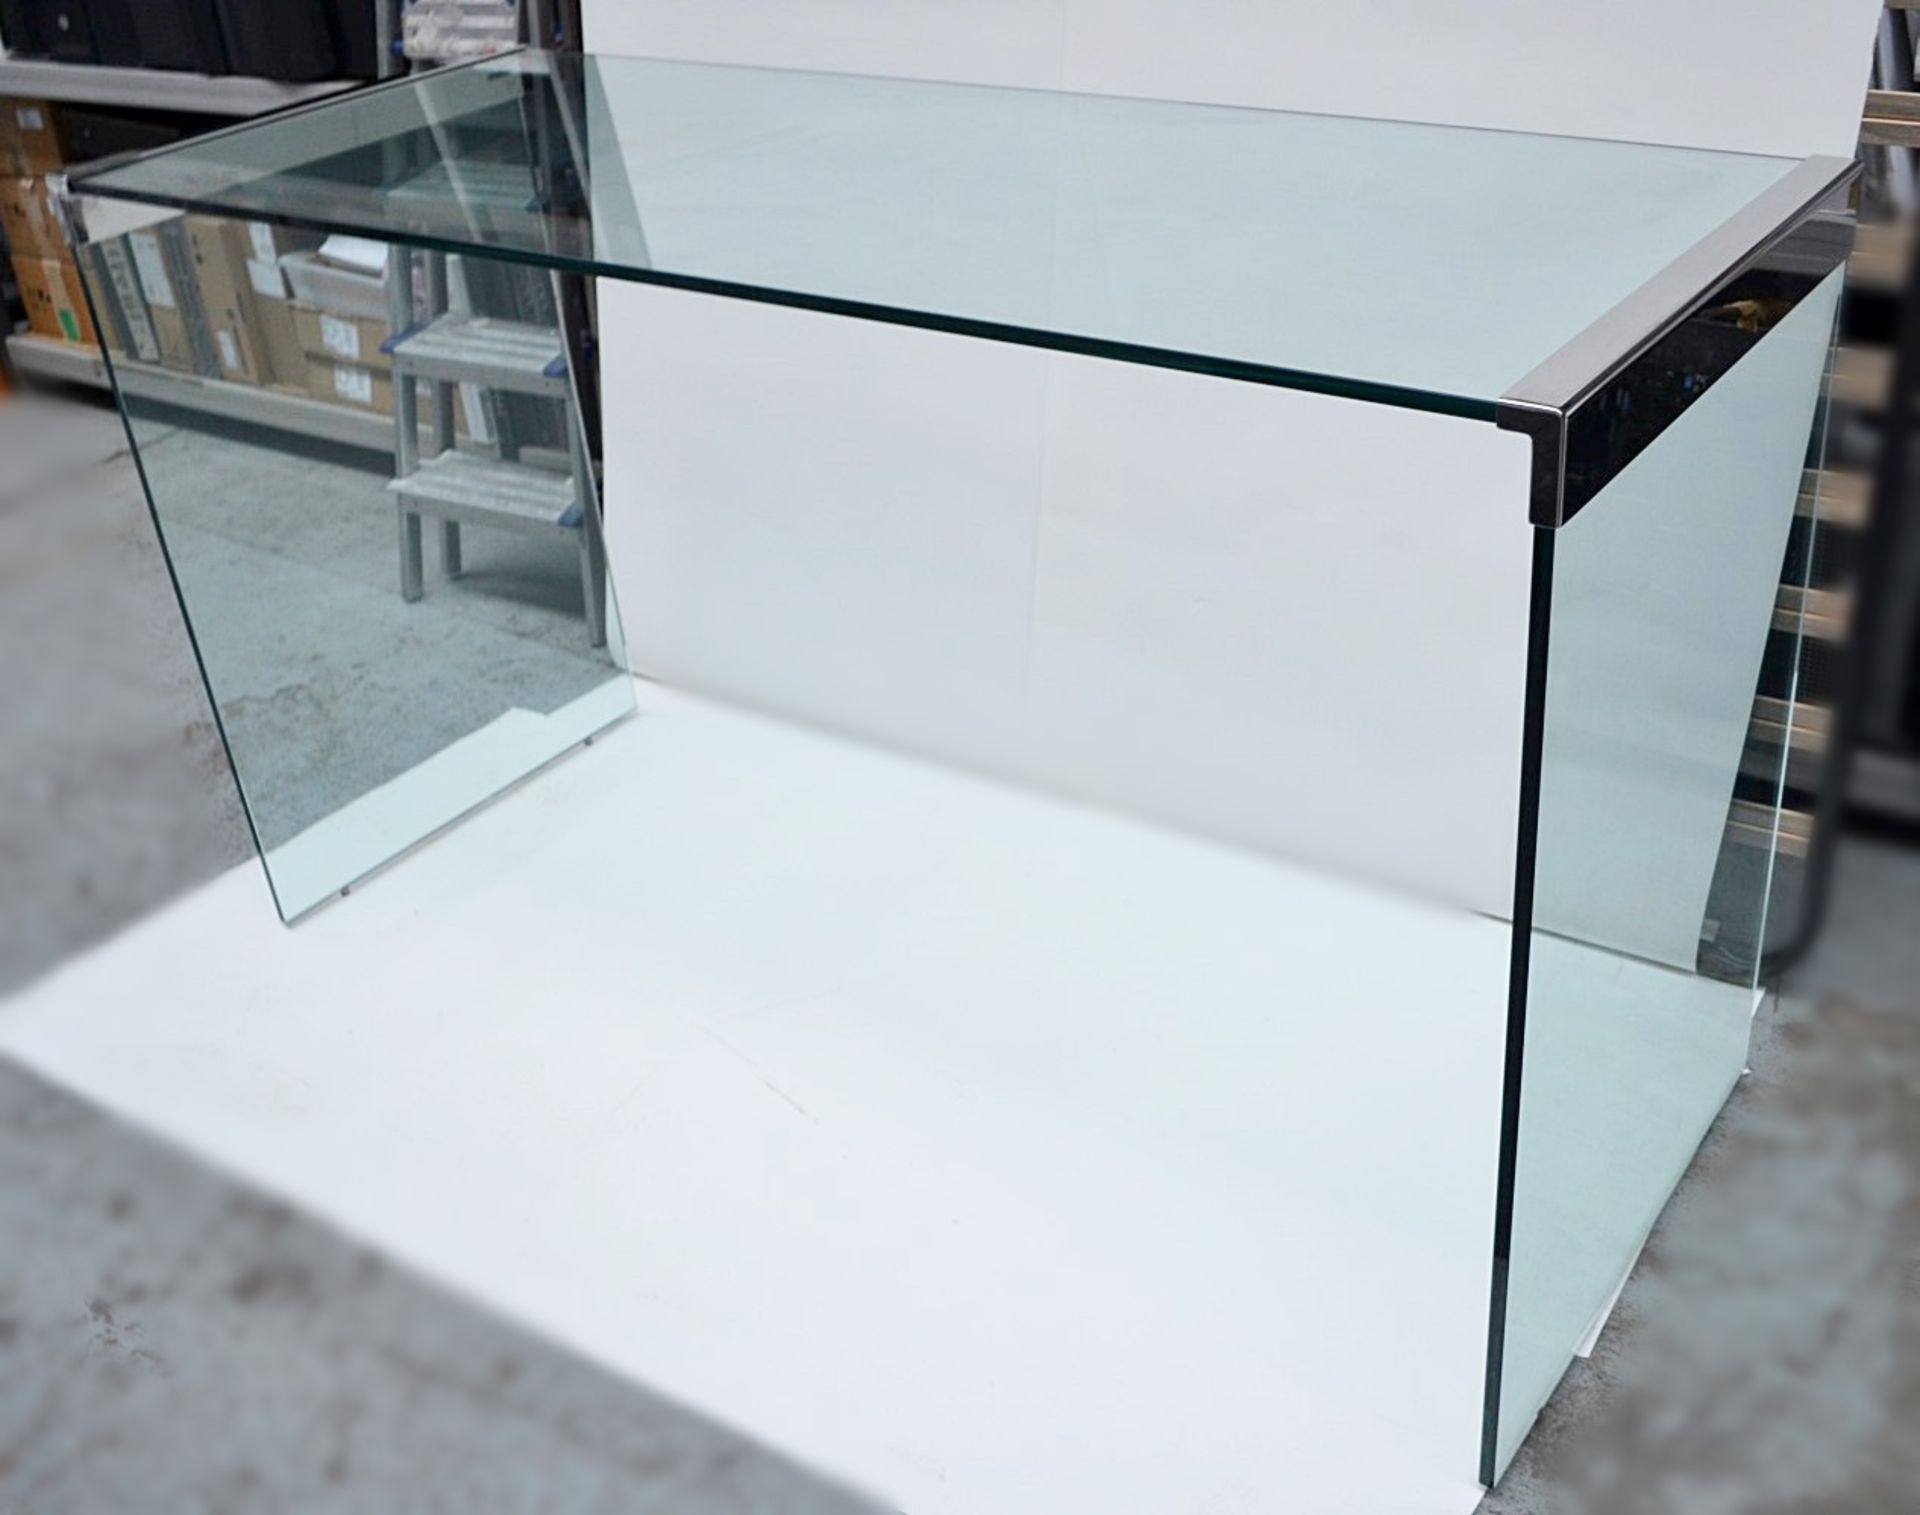 1 x FENDI Canova Glass Console Table With Chromed Corners - Dimensions: W170 x D65 x H99cm, Glass - Image 3 of 10